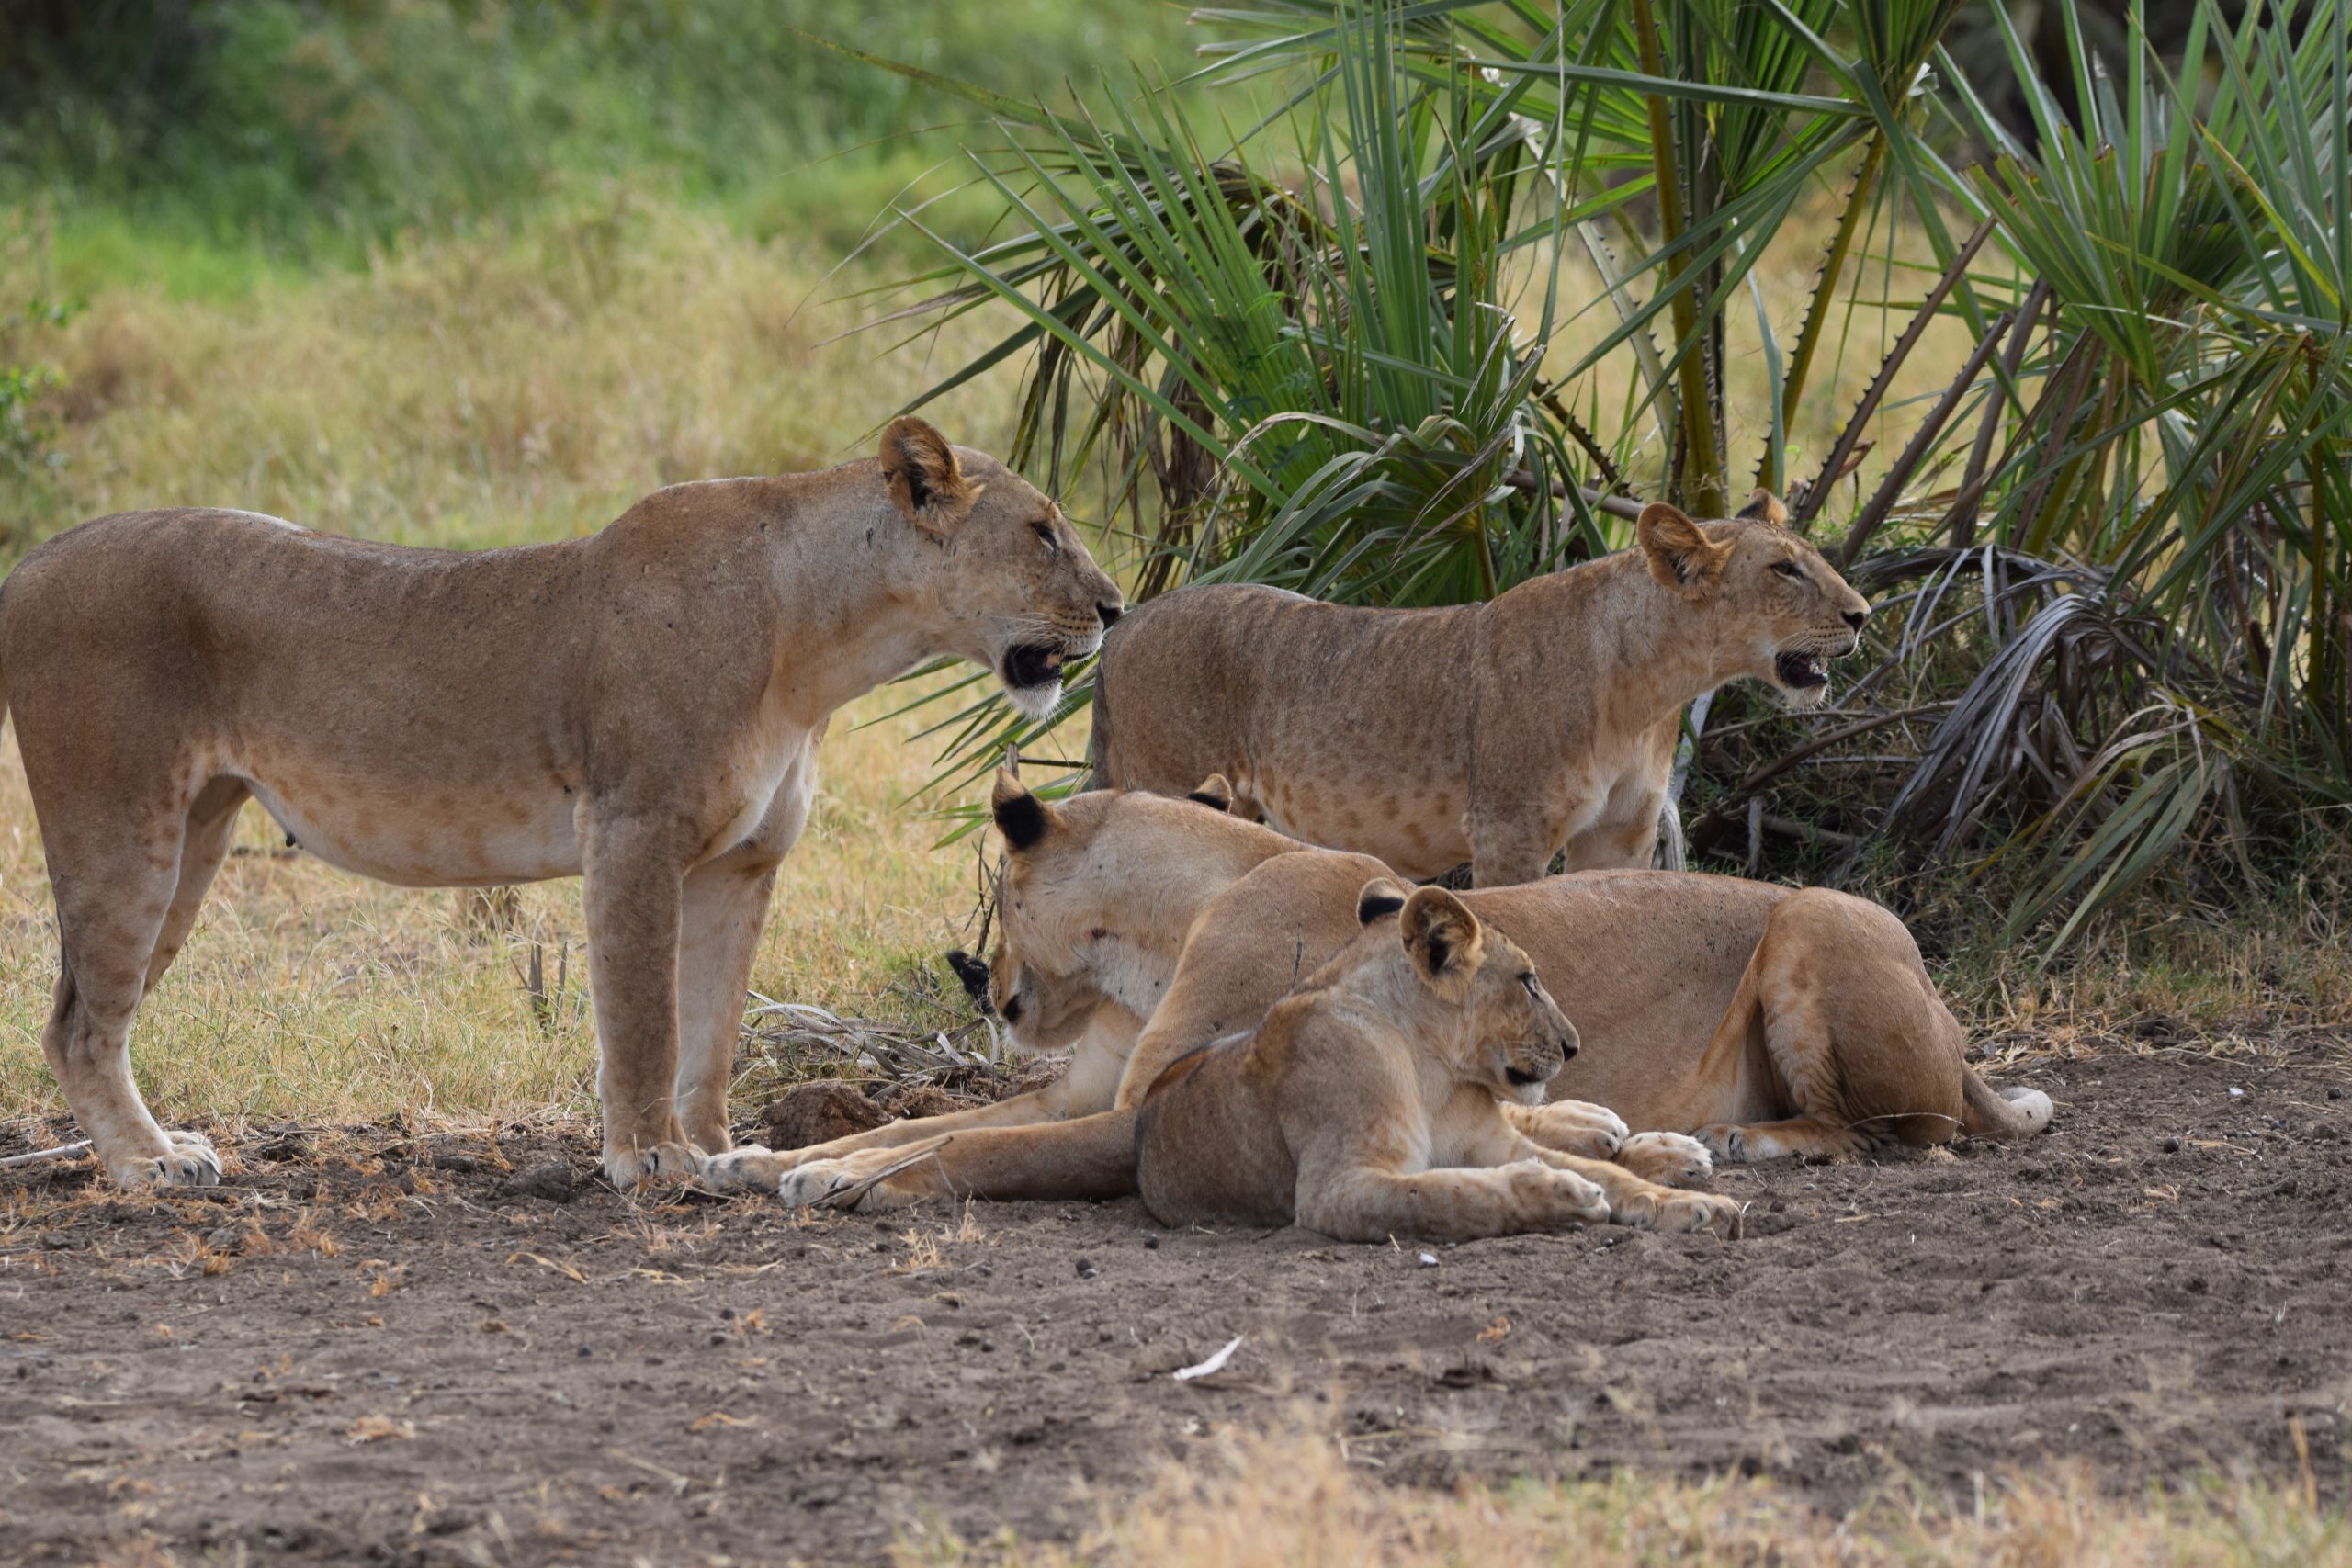 A group of lionesses relaxing together under shady trees